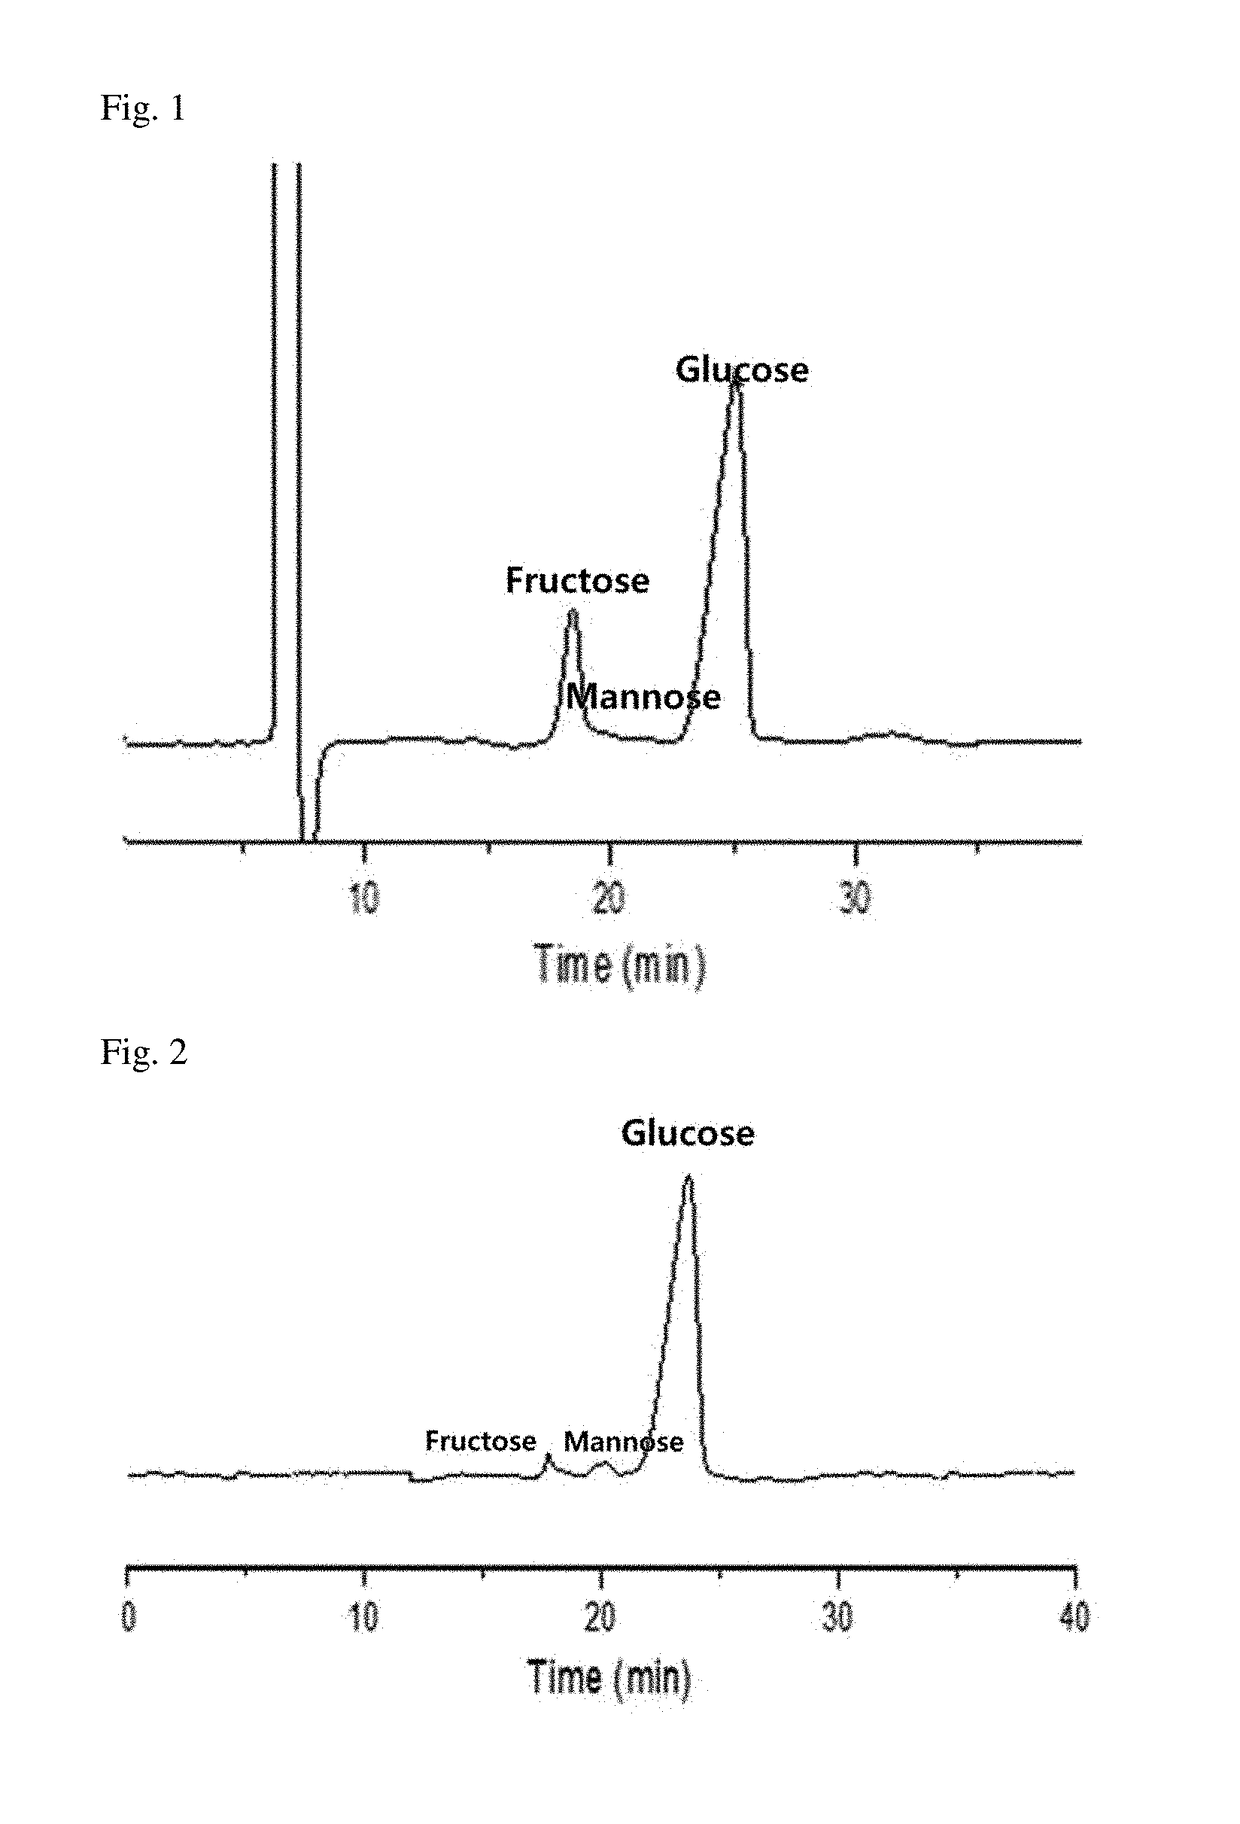 Method for preparing fructose or xylulose from biomass containing glucose or xylose using butanol, and method for separating the same